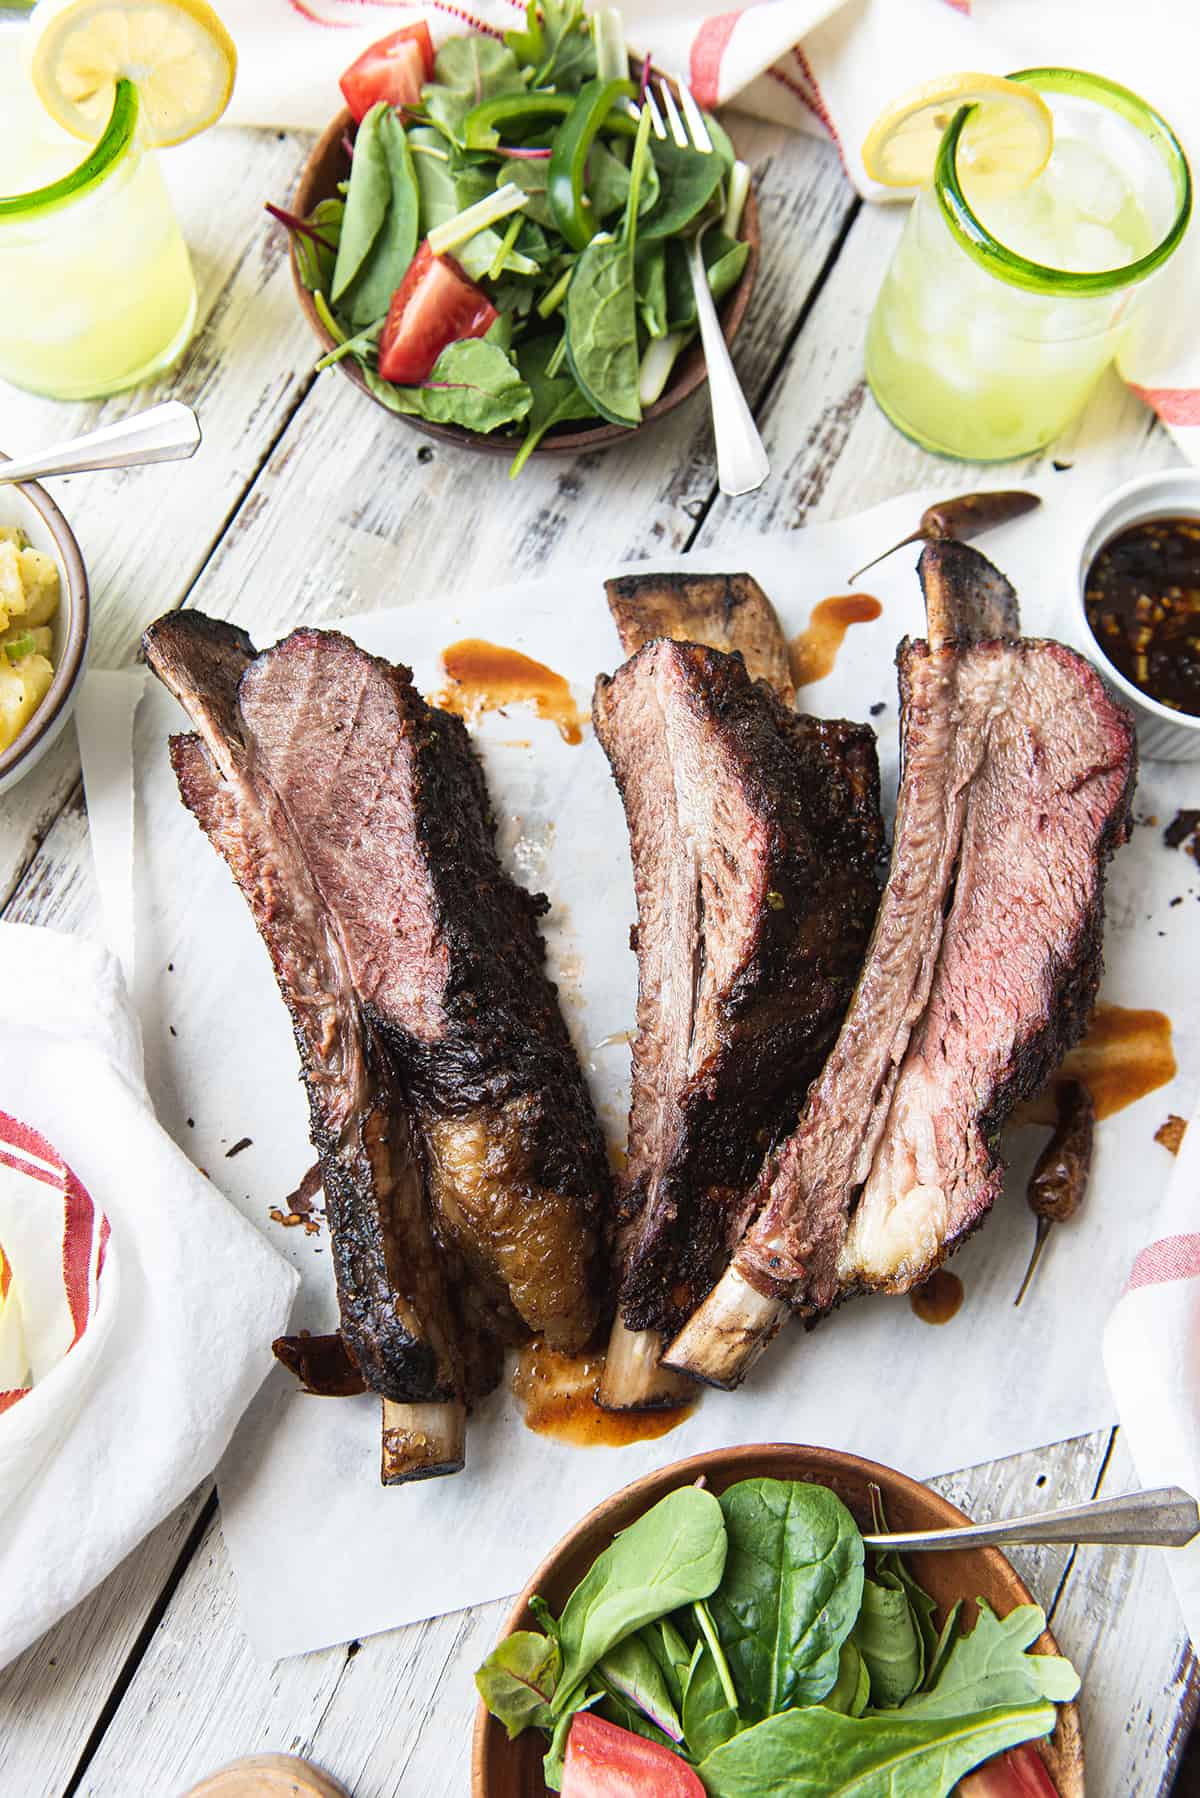 smoked beef ribs on parchment paper with salads red striped napkin, lemonade